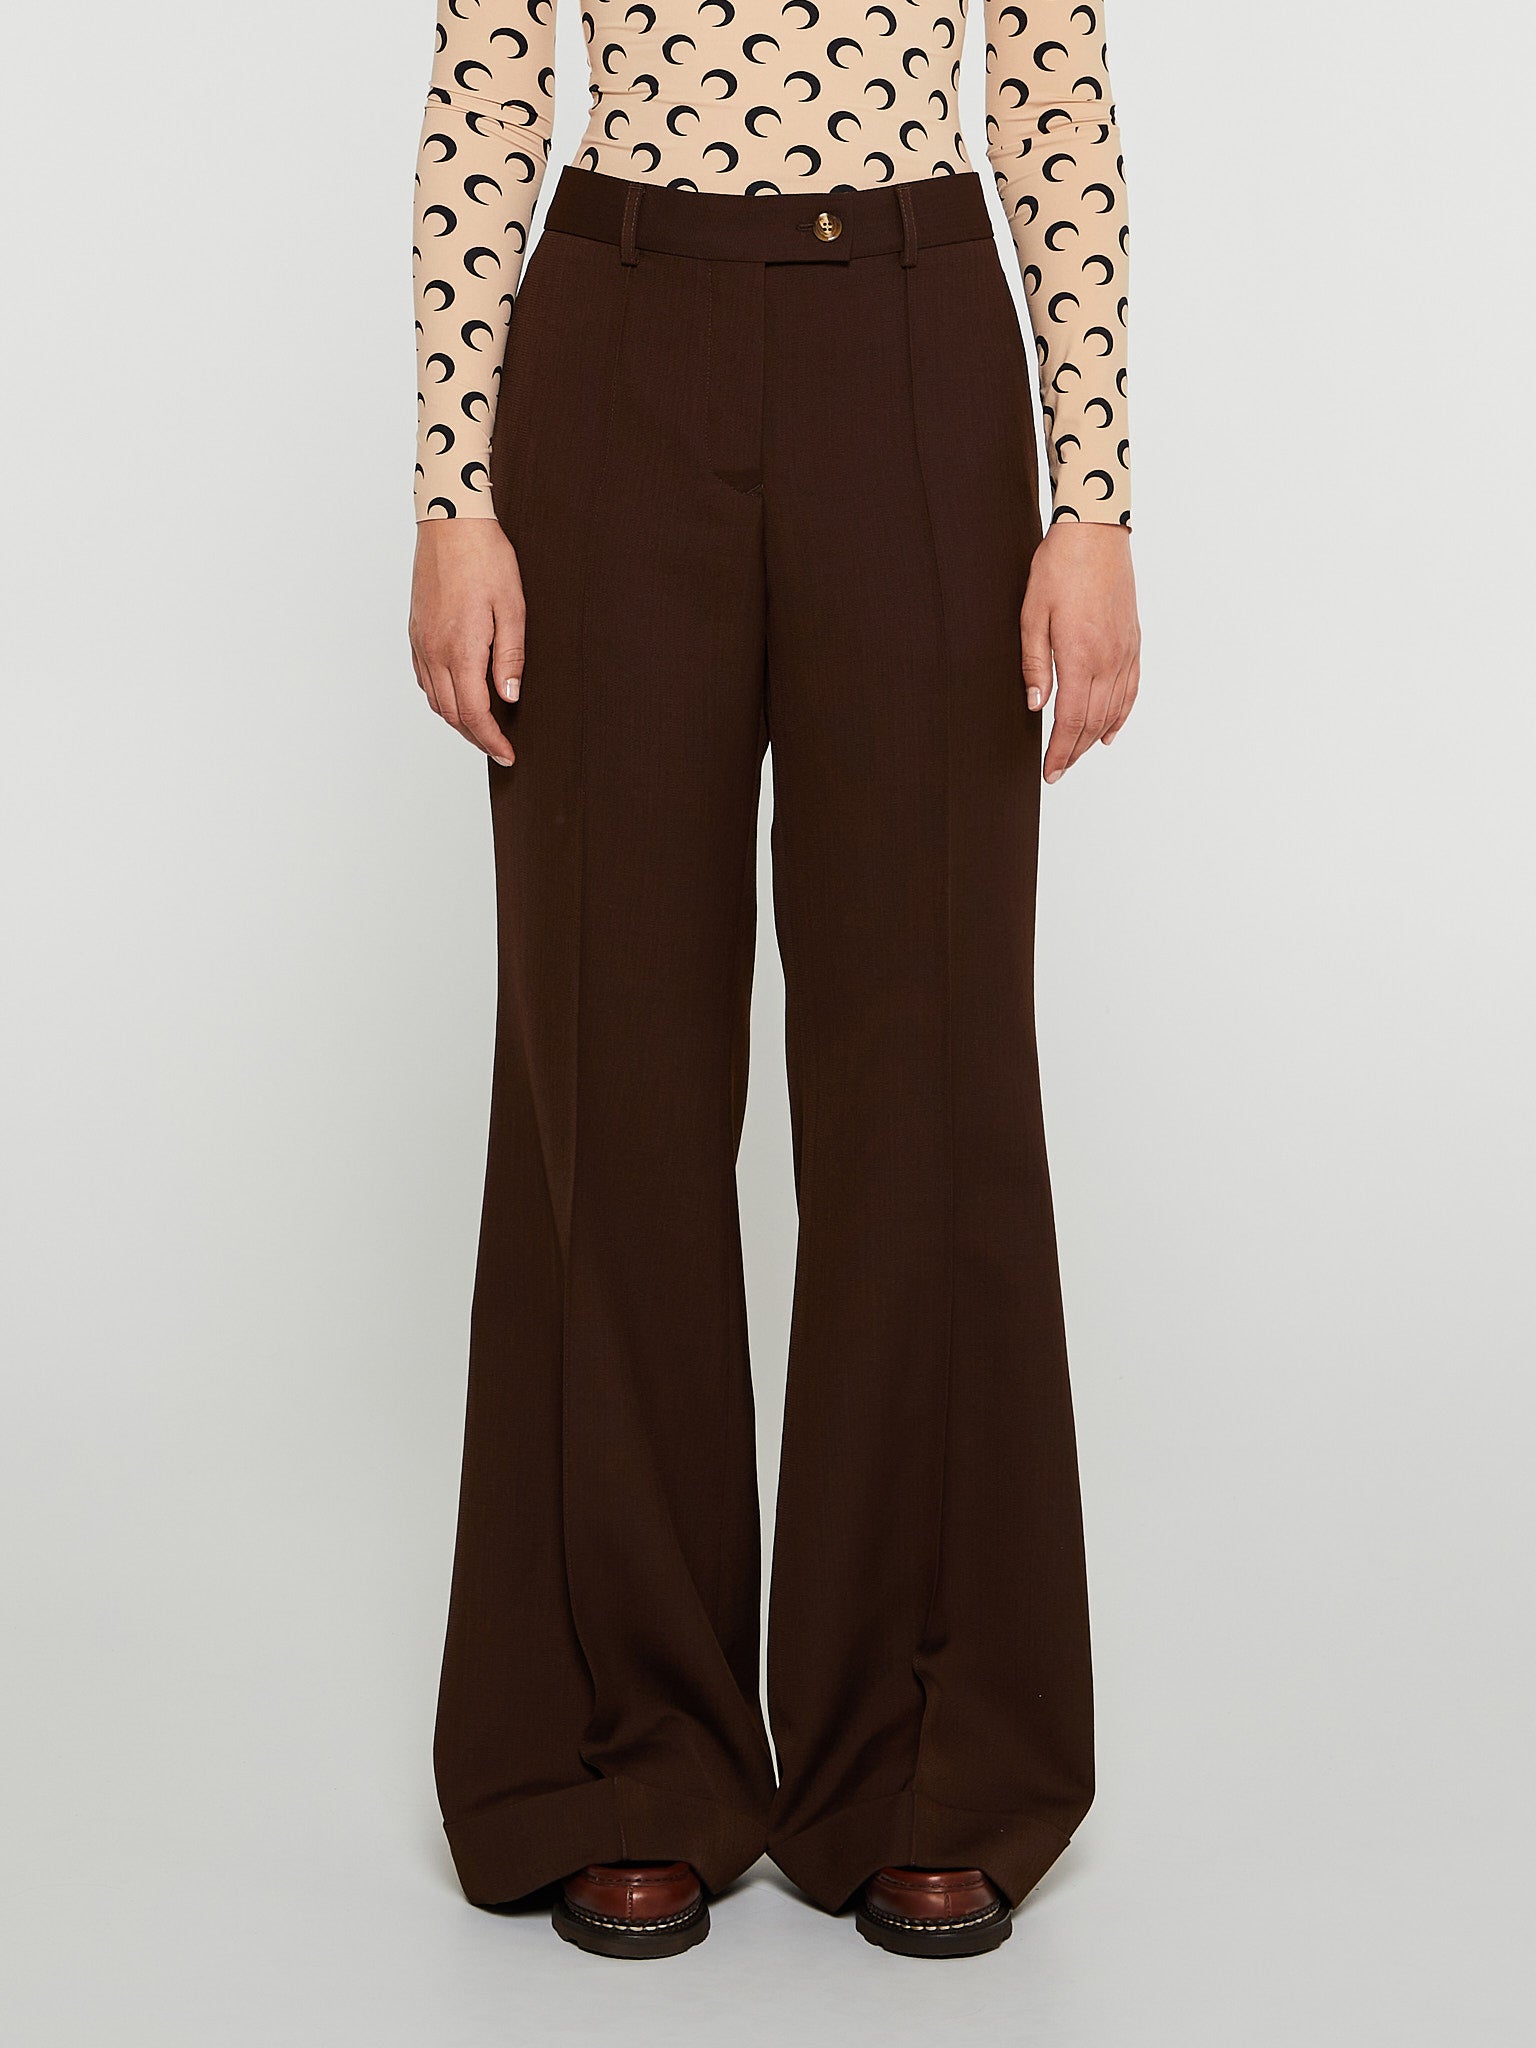 Acne Studios - Tailored Flared Trousers in Chestnut Brown – stoy